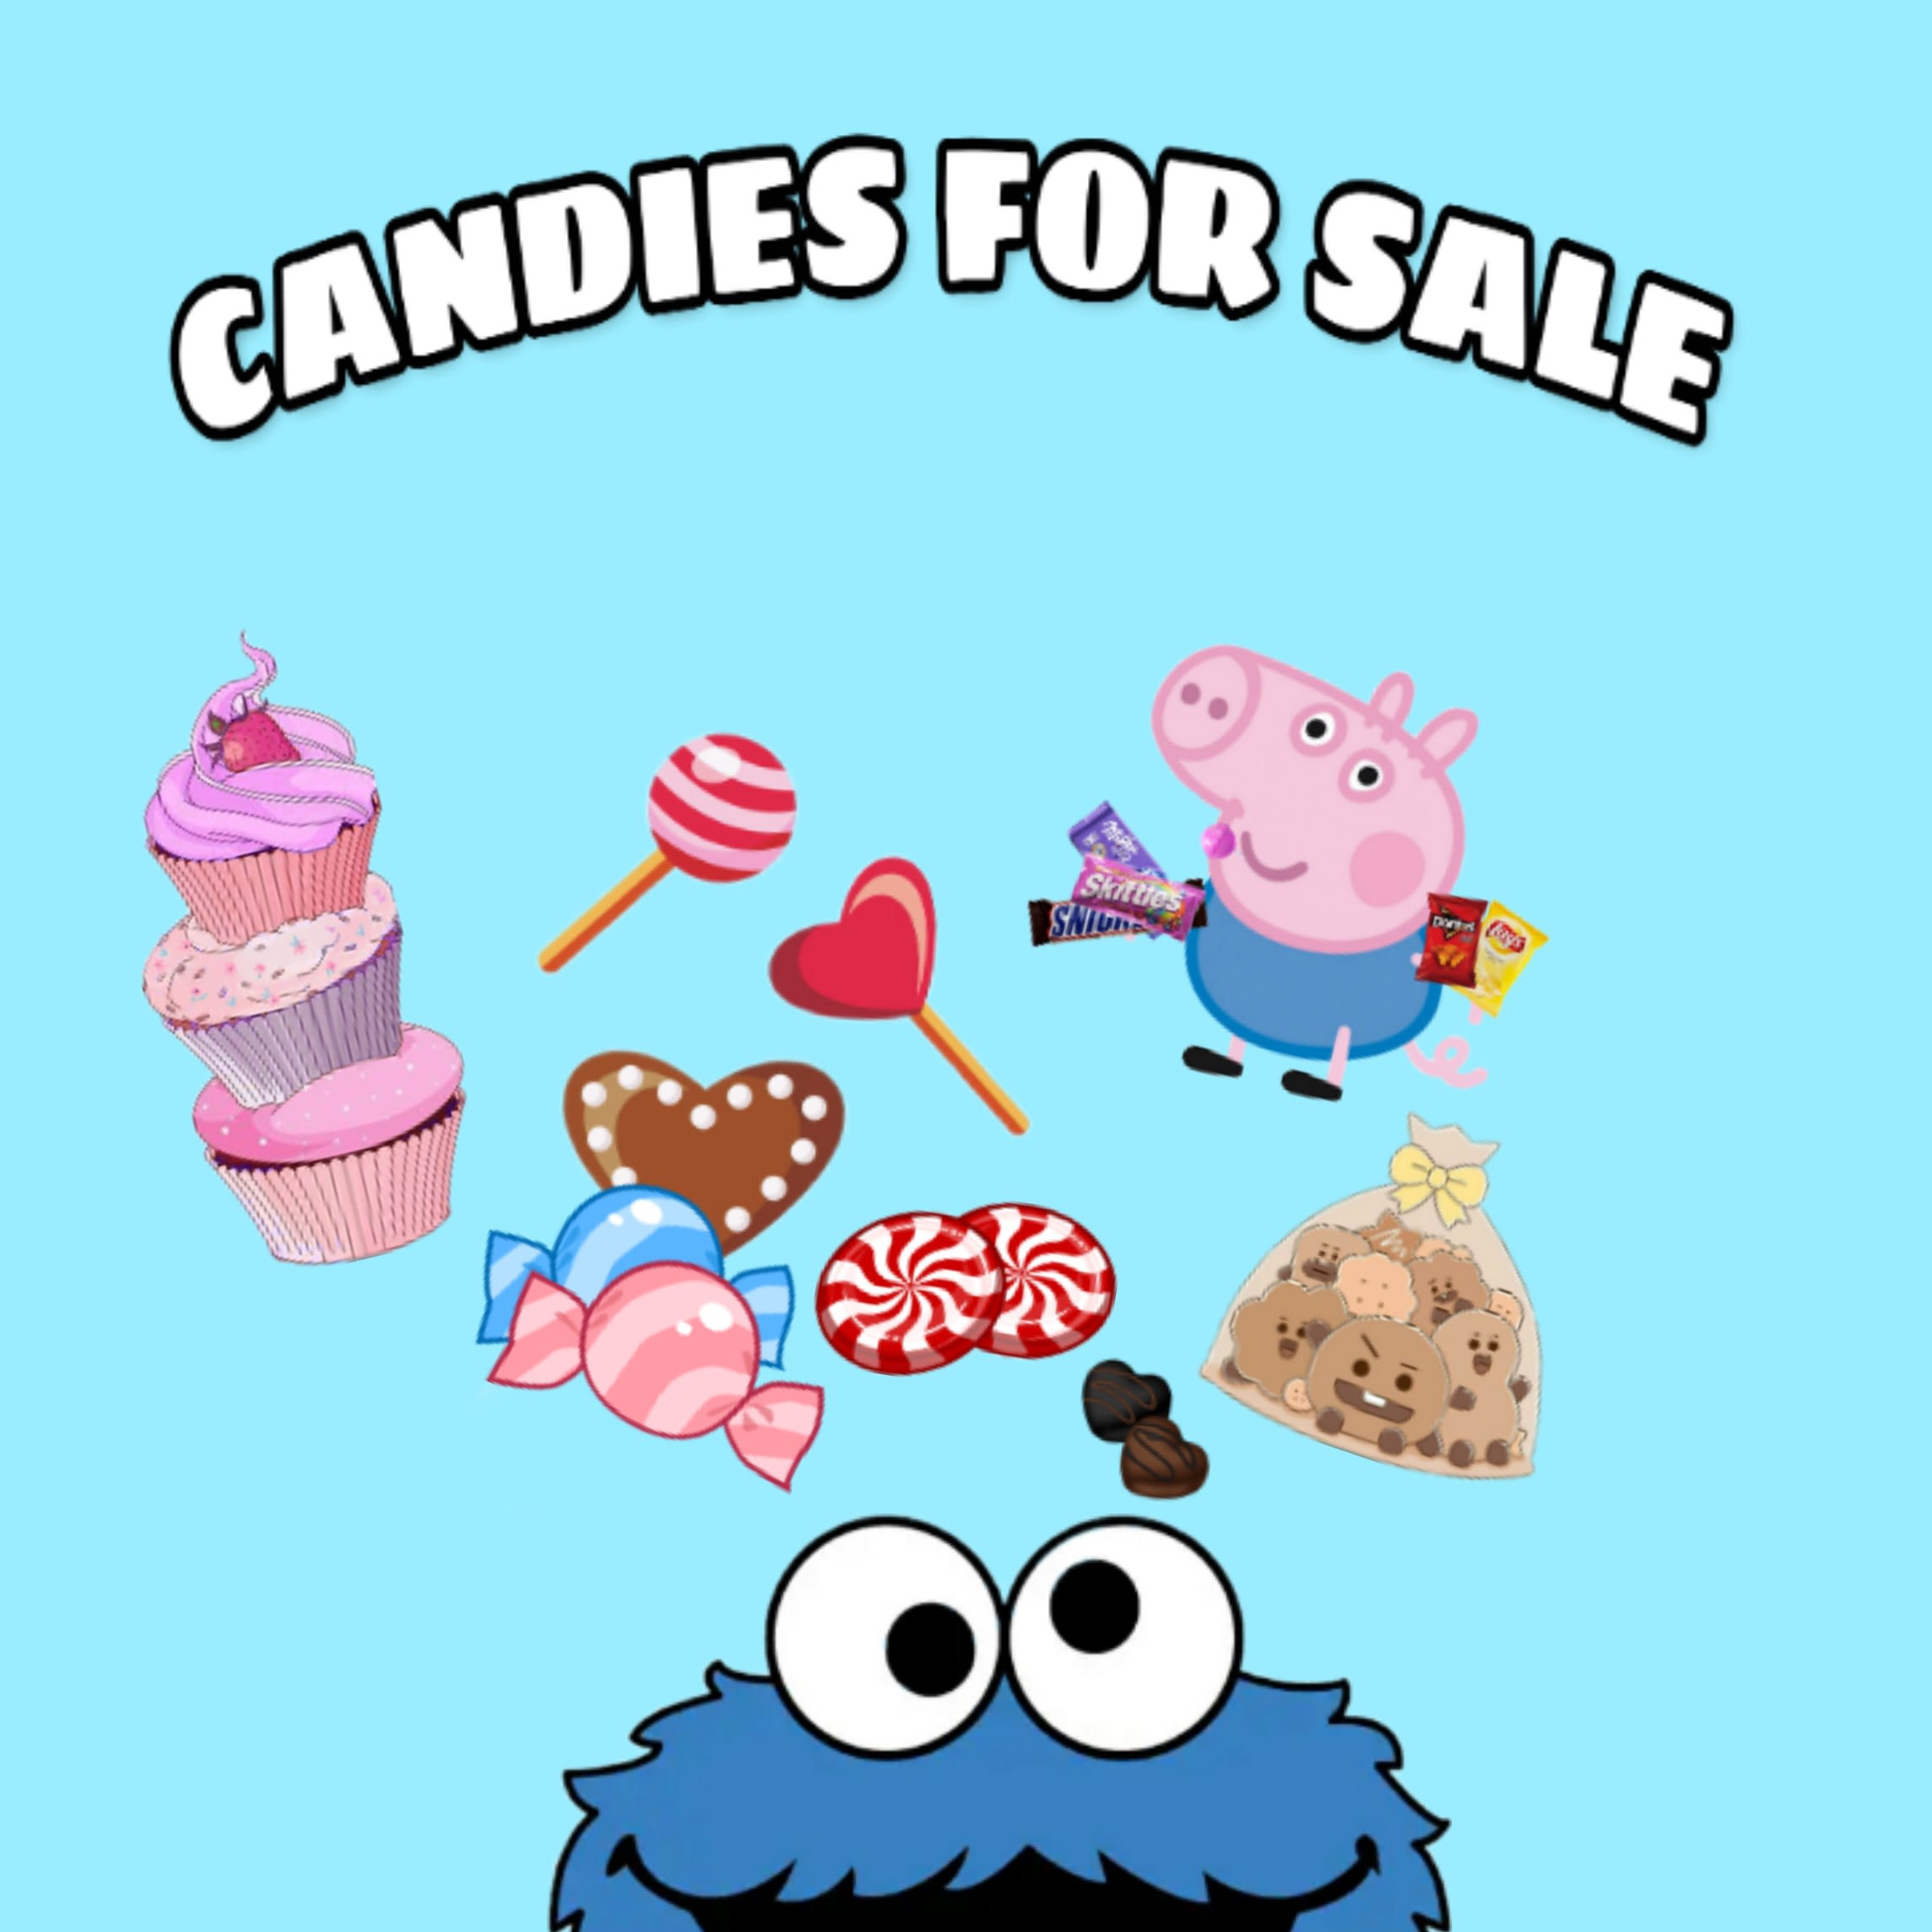 Candies For Sale